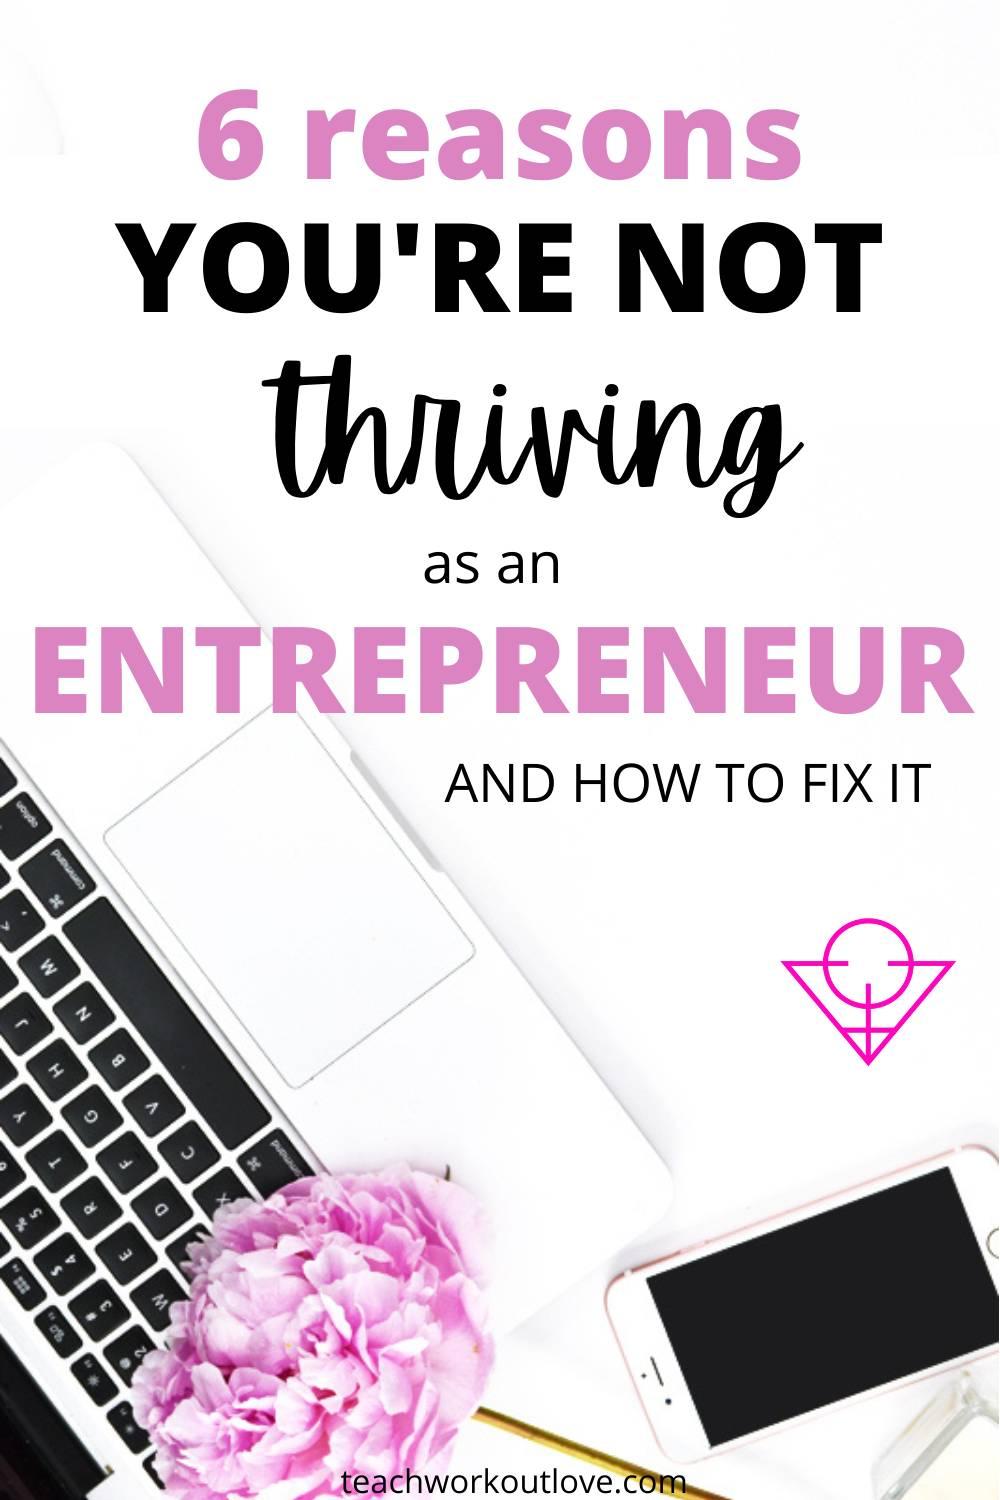 today in this article, we will talk about ways to help fit your business into your lifestyle and how to thrive as an entrepreneur using tips from The Mind Designer.